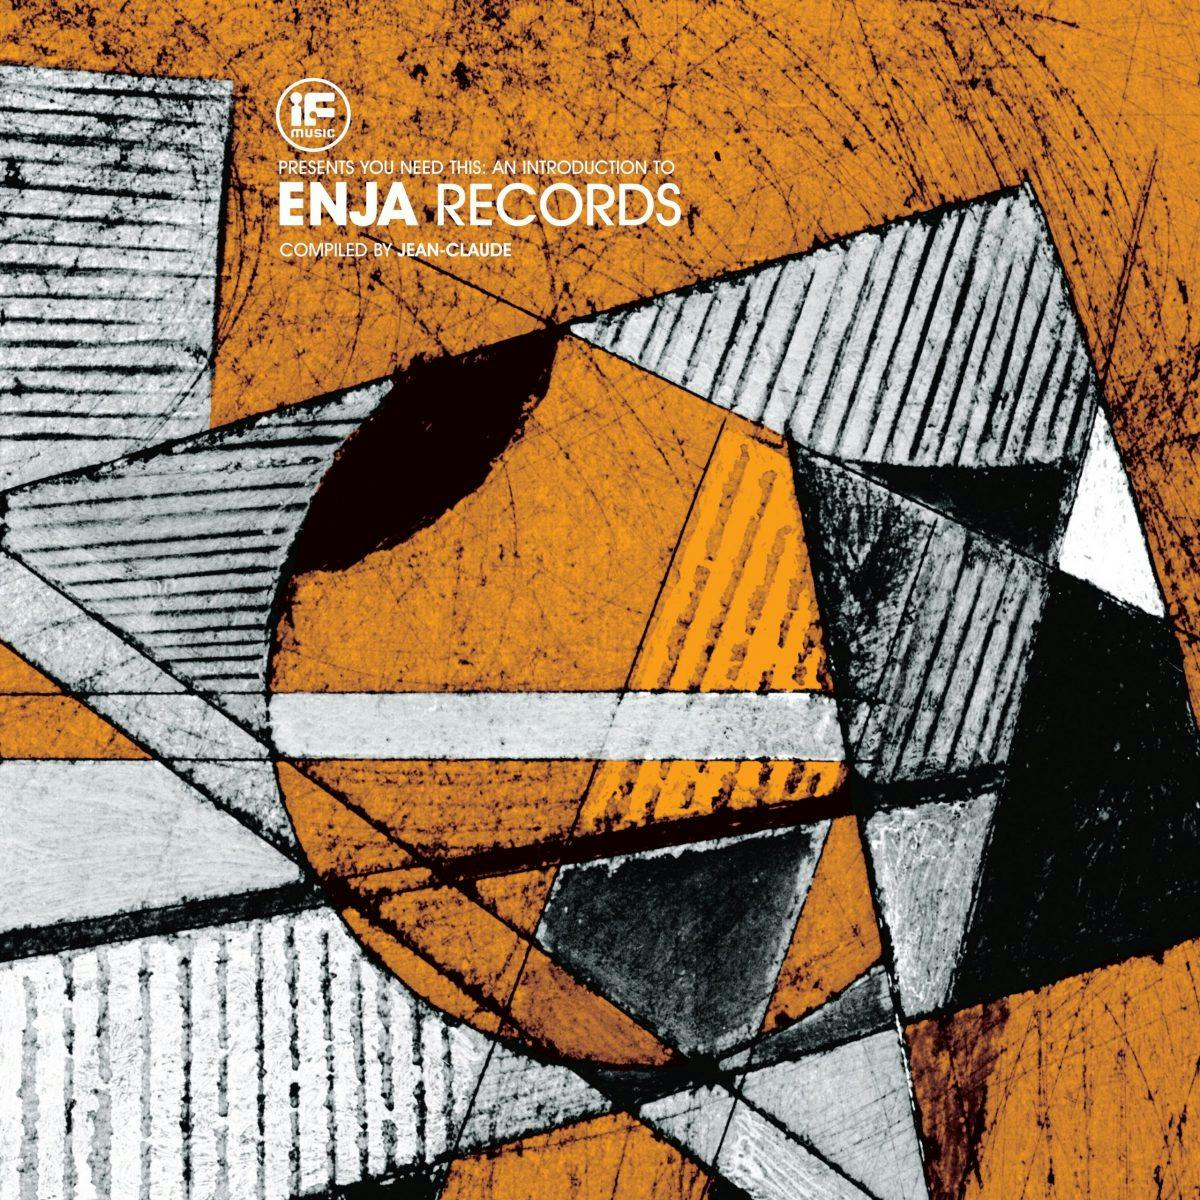 Part of IF Music founder Jean-Claude’s ever expanding ‘YOU NEED THIS!’ series of compilation albums, the London record shop impresario and DJ takes us on another scintillating musical journey, this time exploring the catalogue of German jazz imprint, Enja Records.